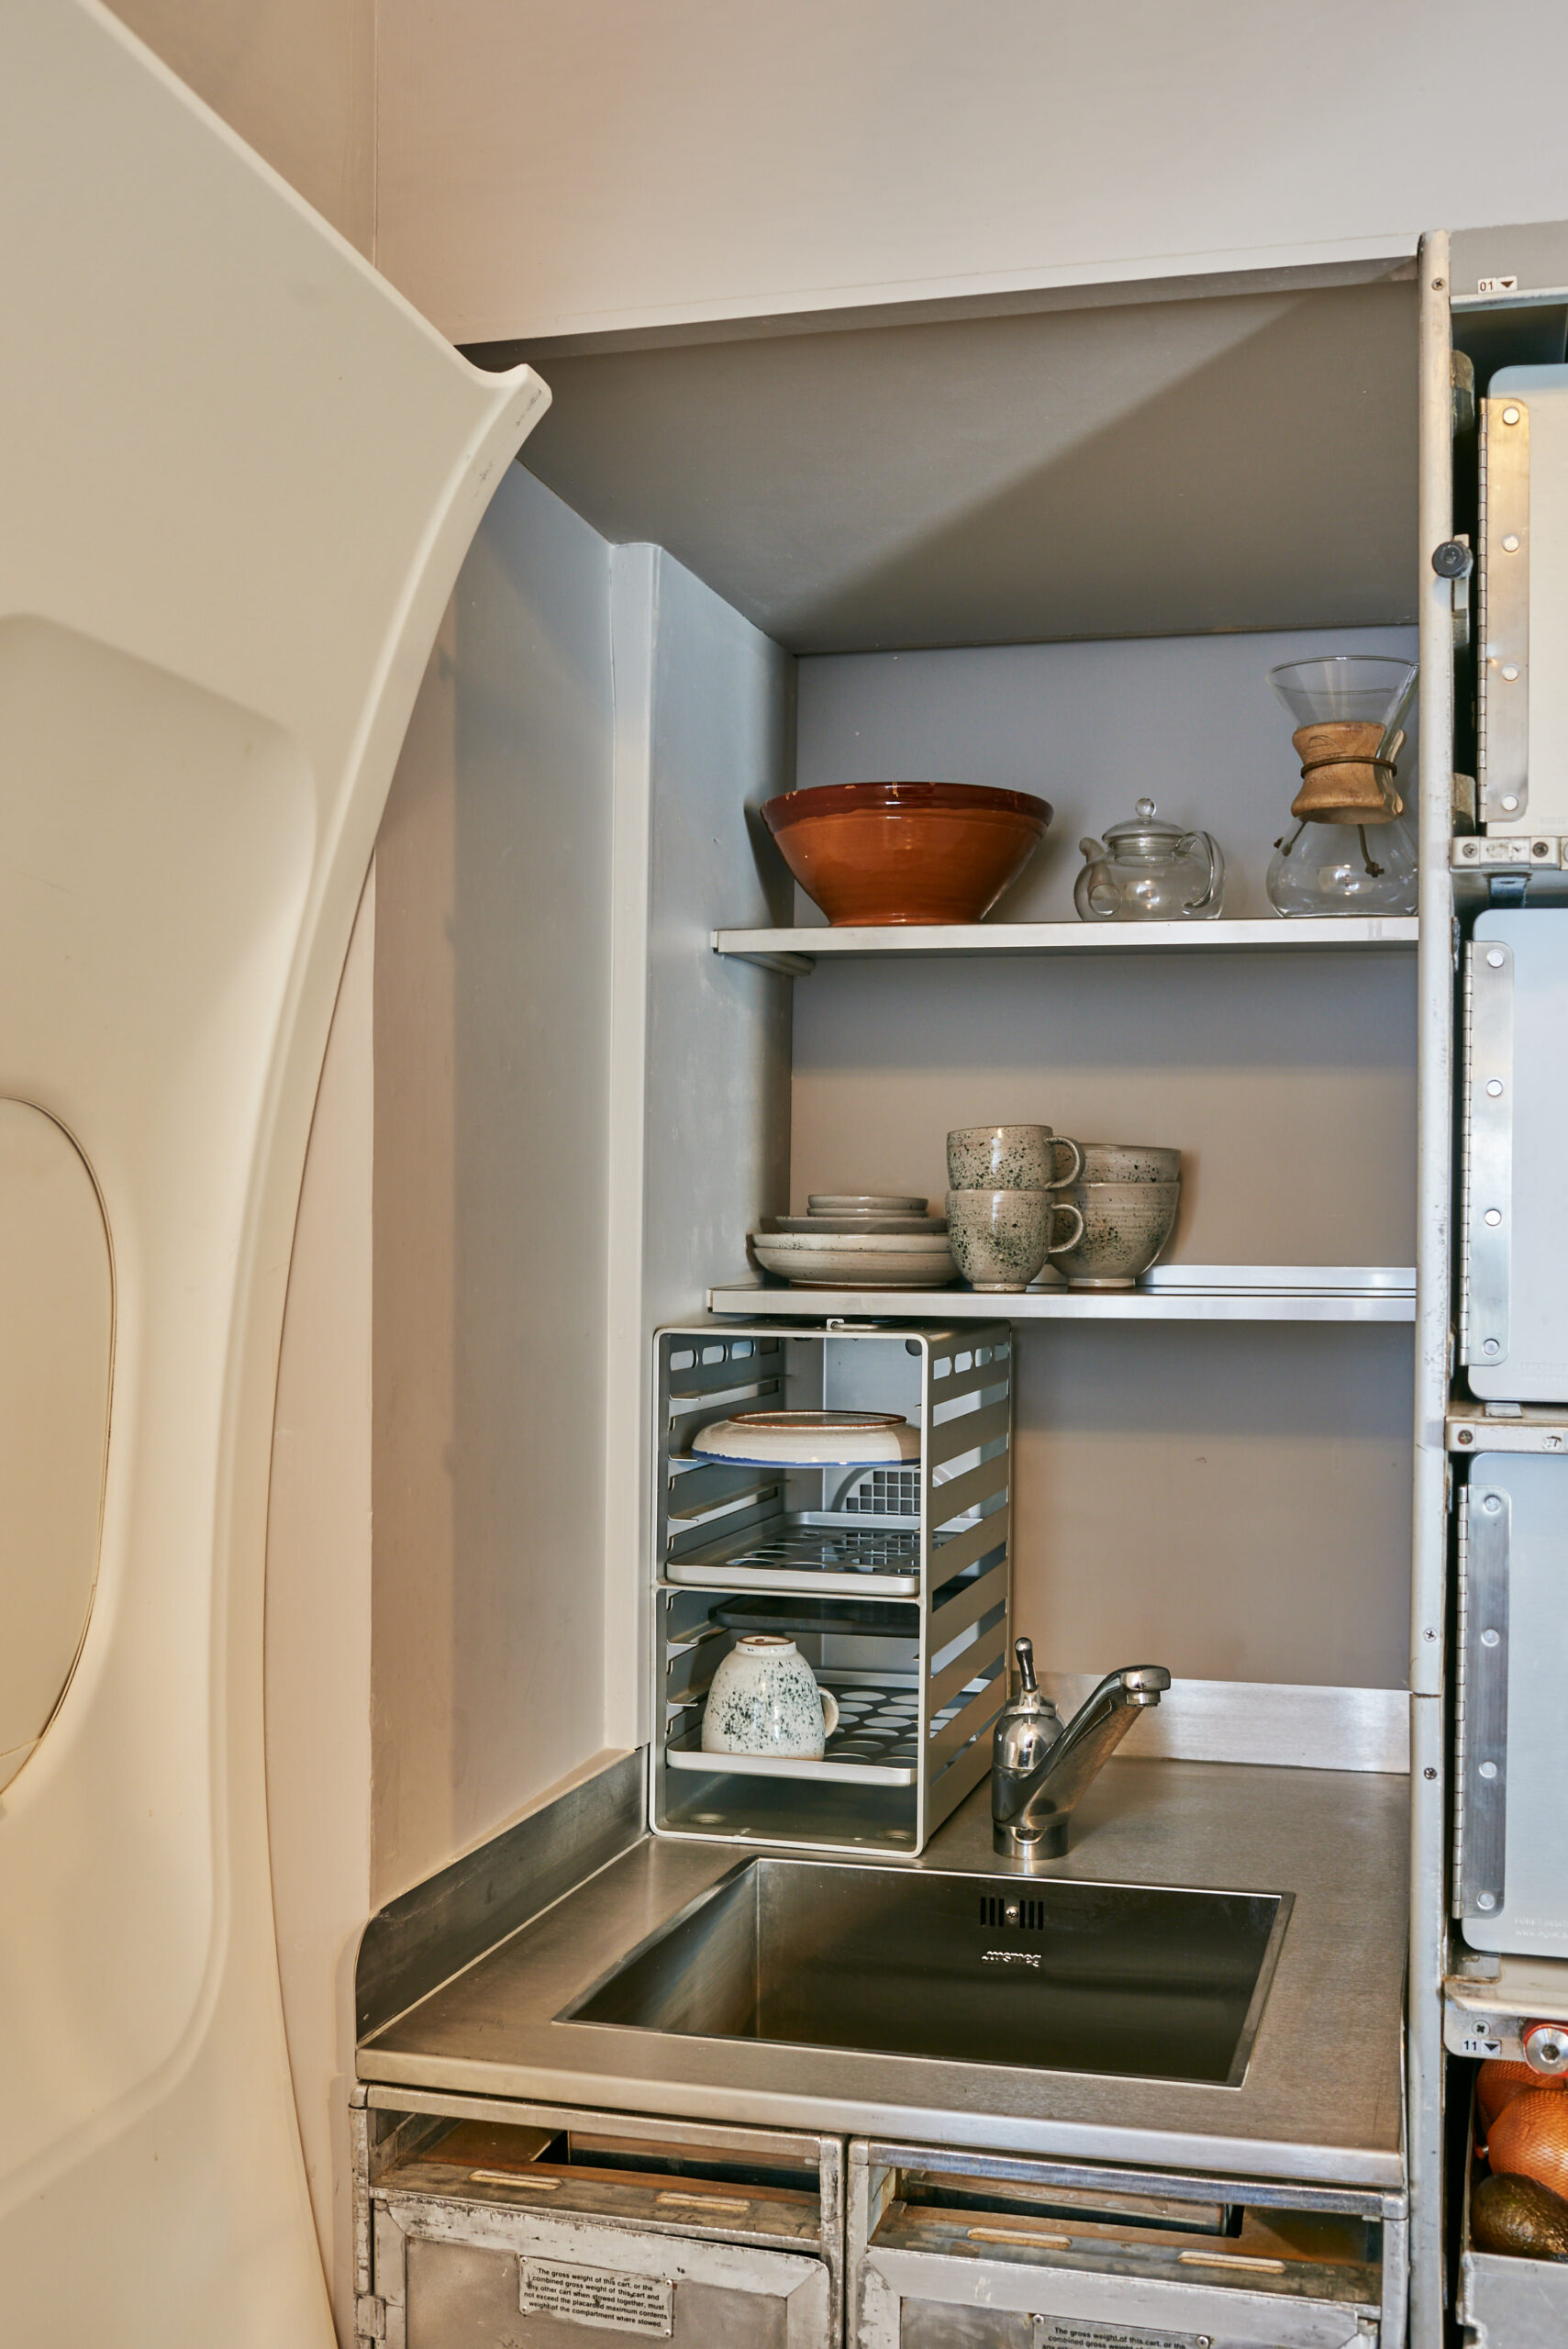 The Boeing 737 galley was transformed into a working kitchen